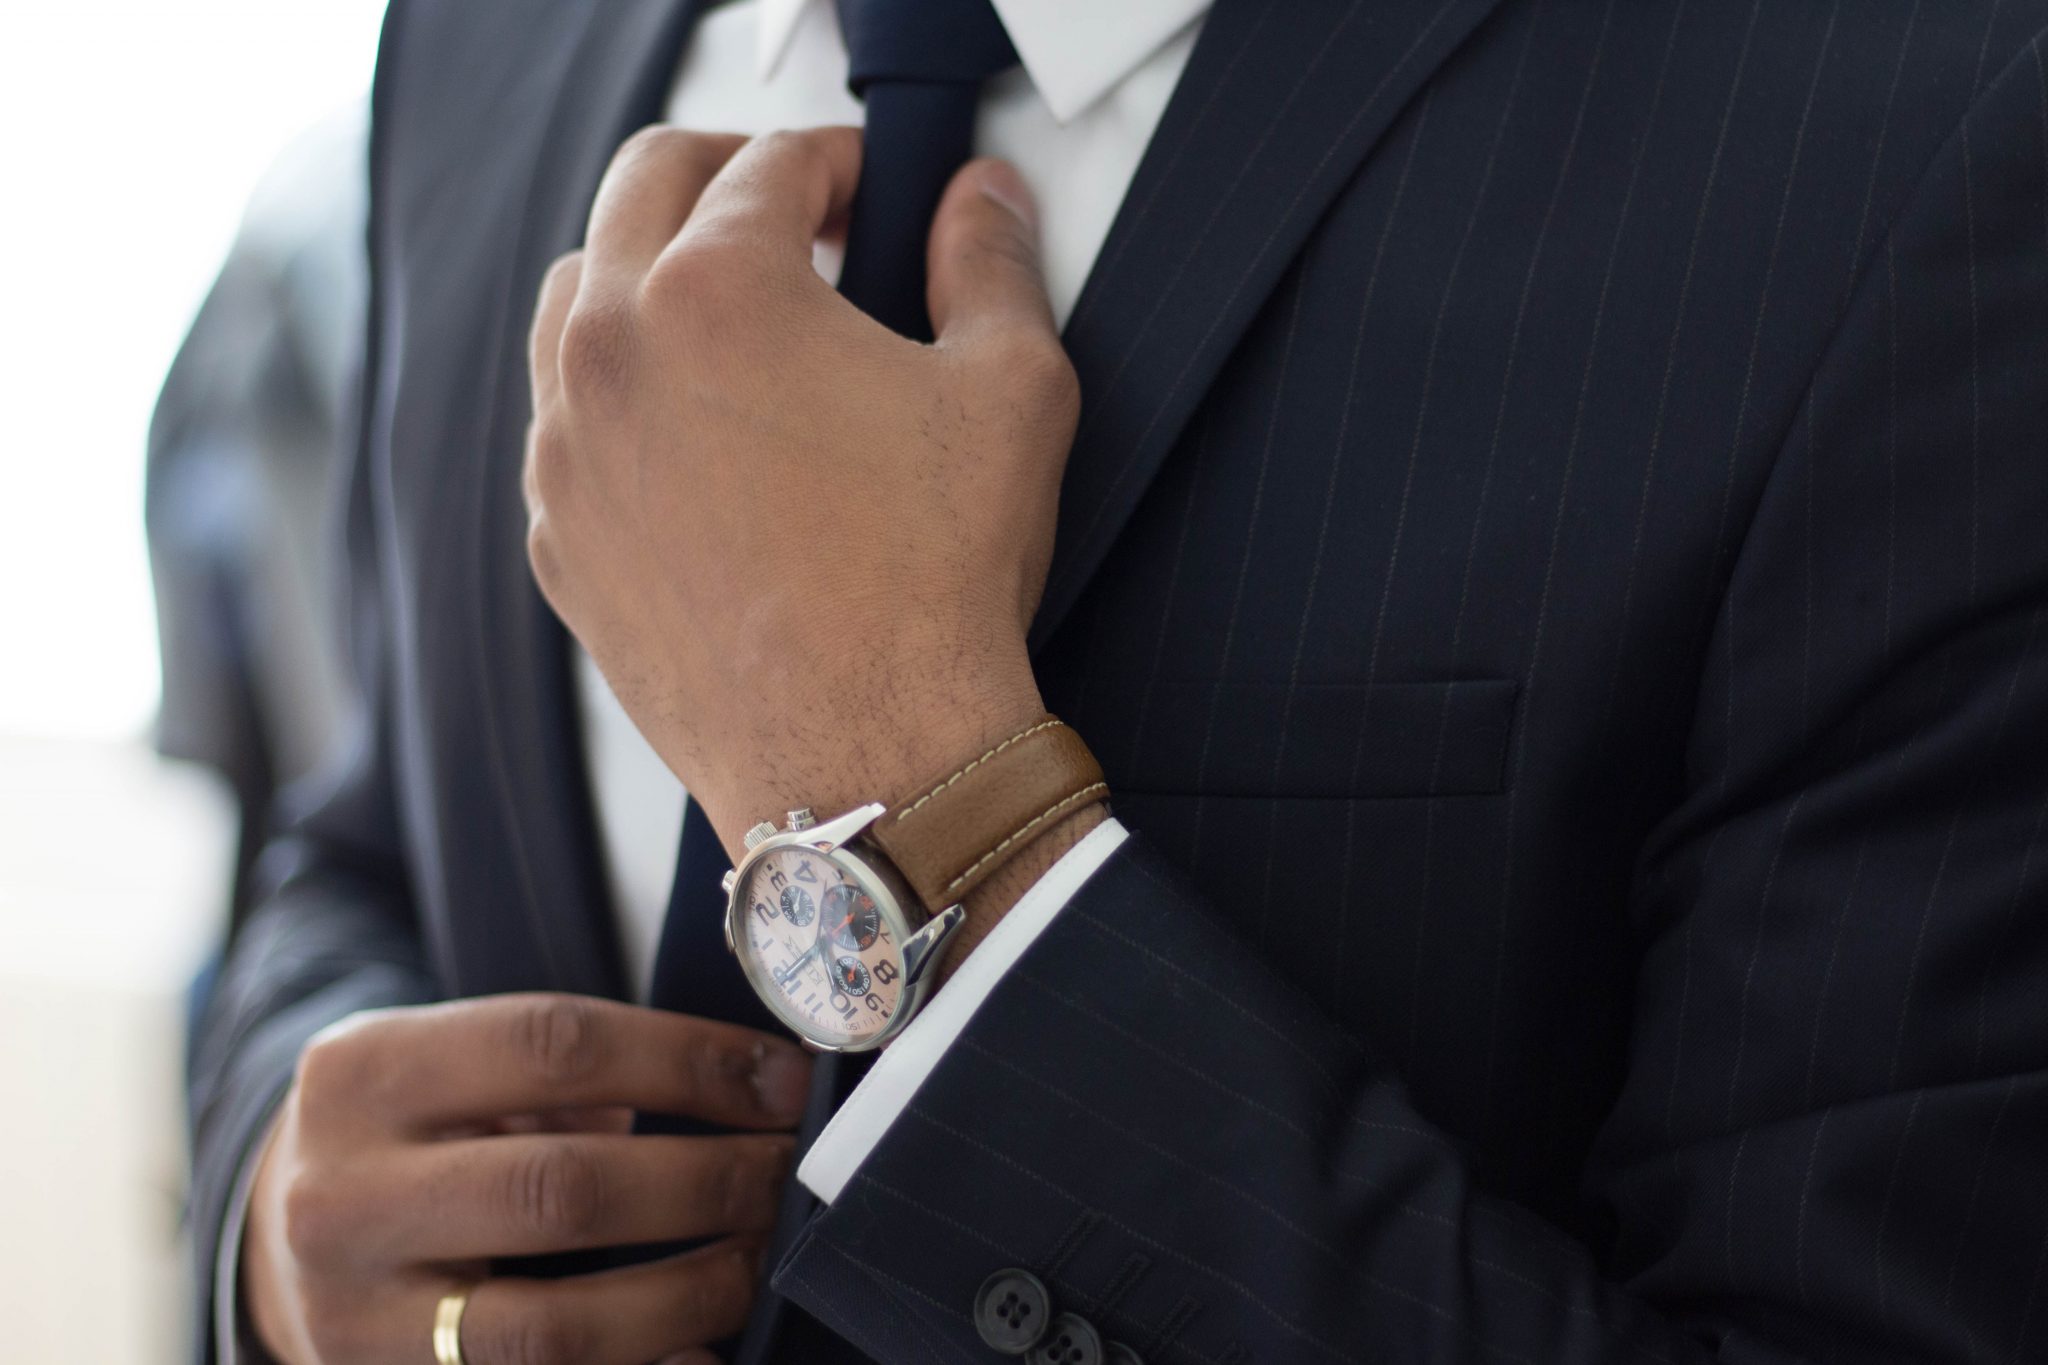 Personal Style Dressing Well Dressing For The Workplace man wearing watch with black suit